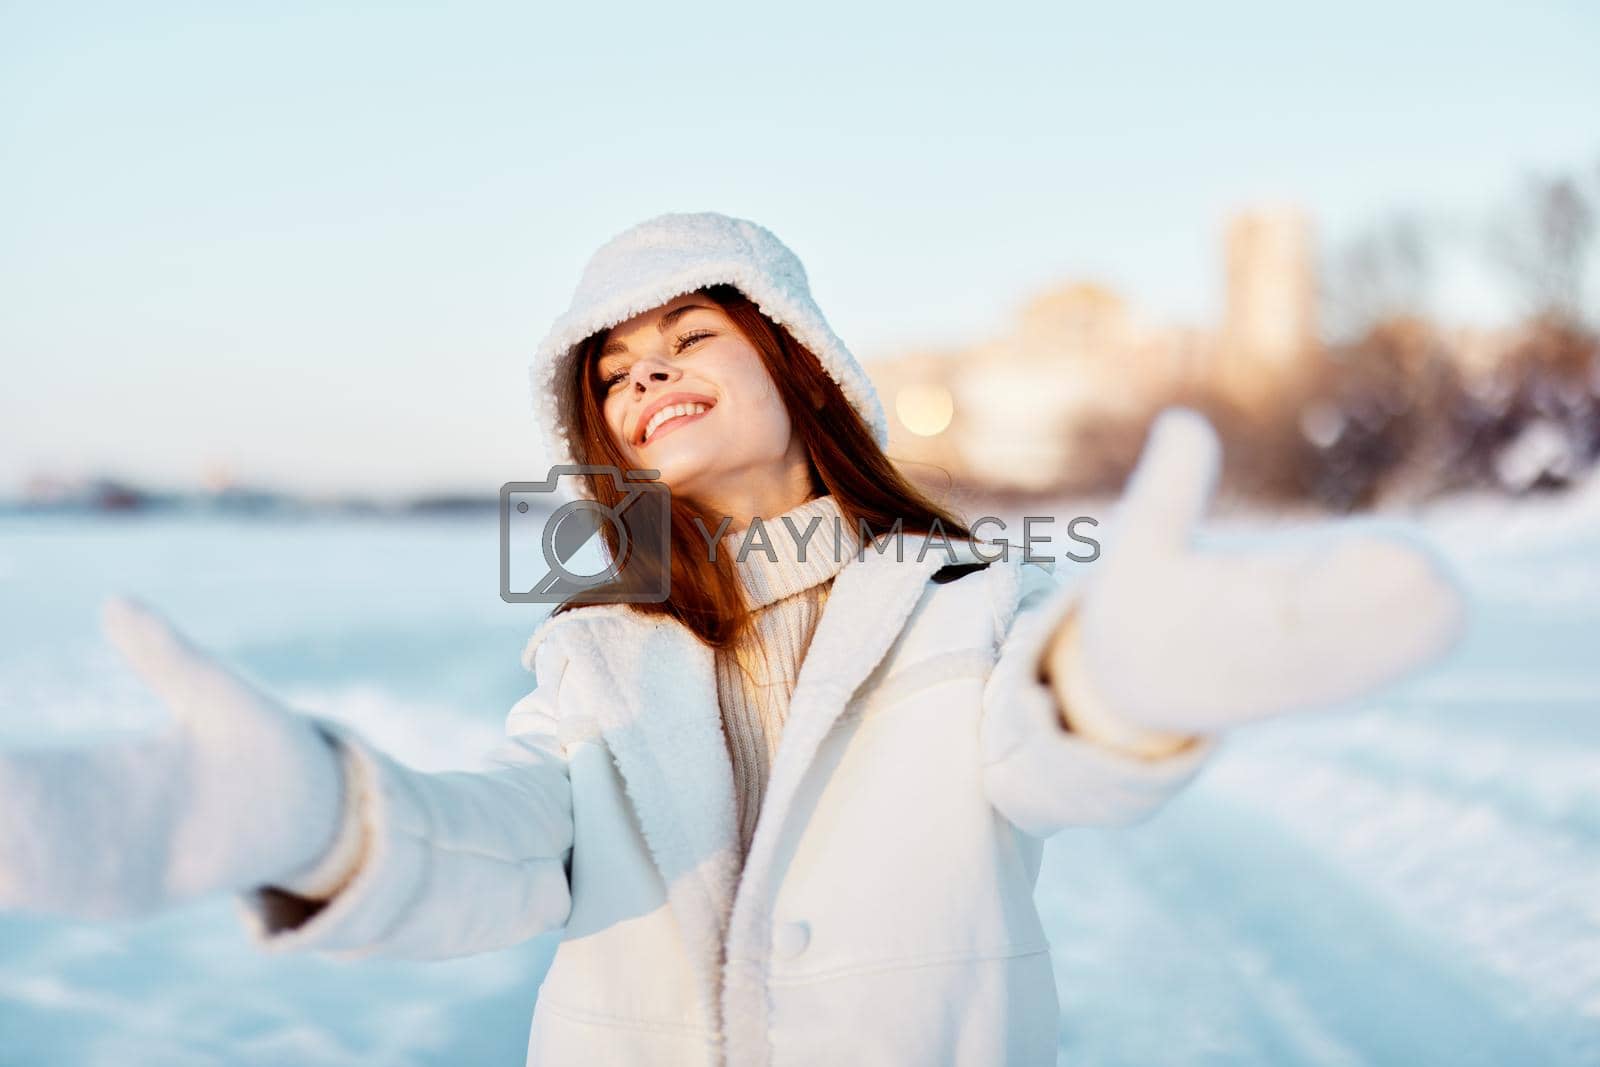 woman winter weather snow posing nature rest nature. High quality photo